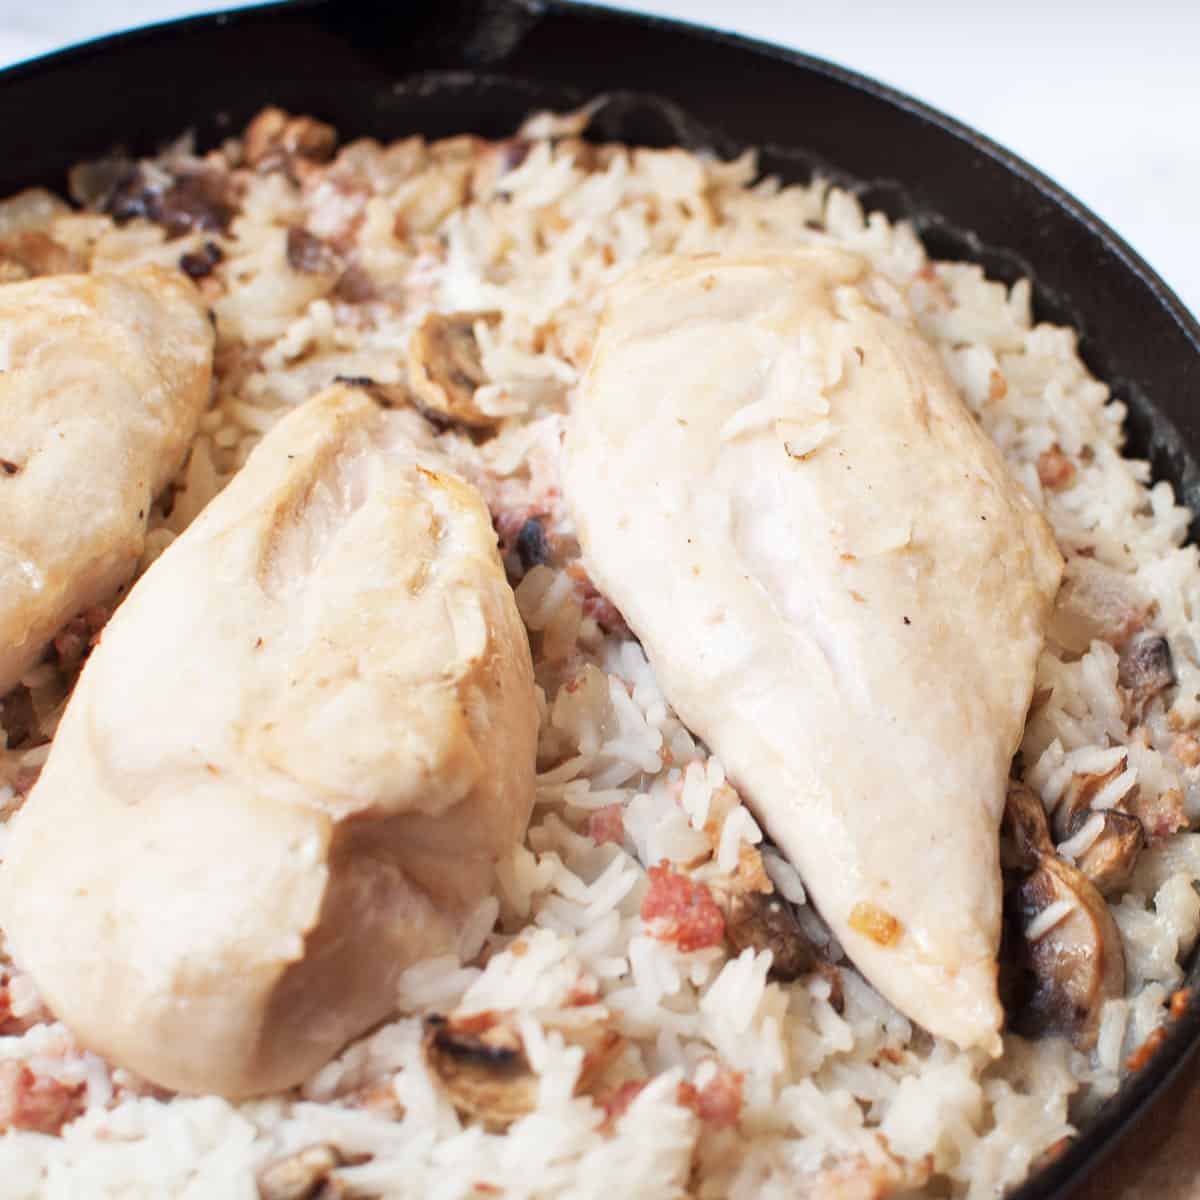 Chicken and rice in a cast iron skillet.